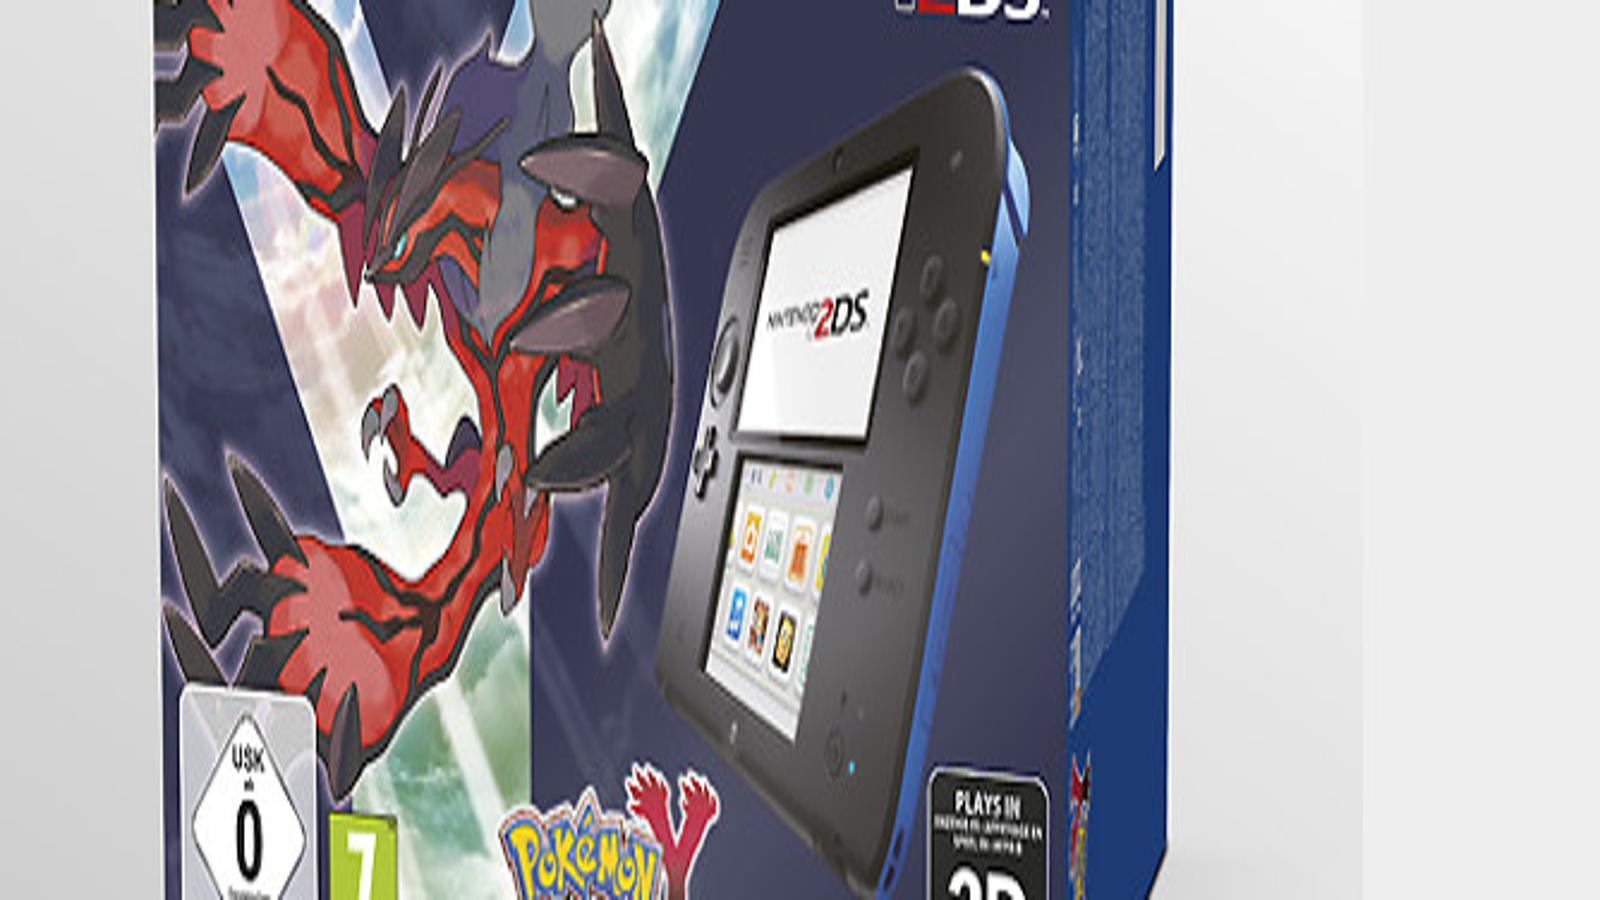 Pokemon X & Y 2DS bundles spotted in Europe | VG247